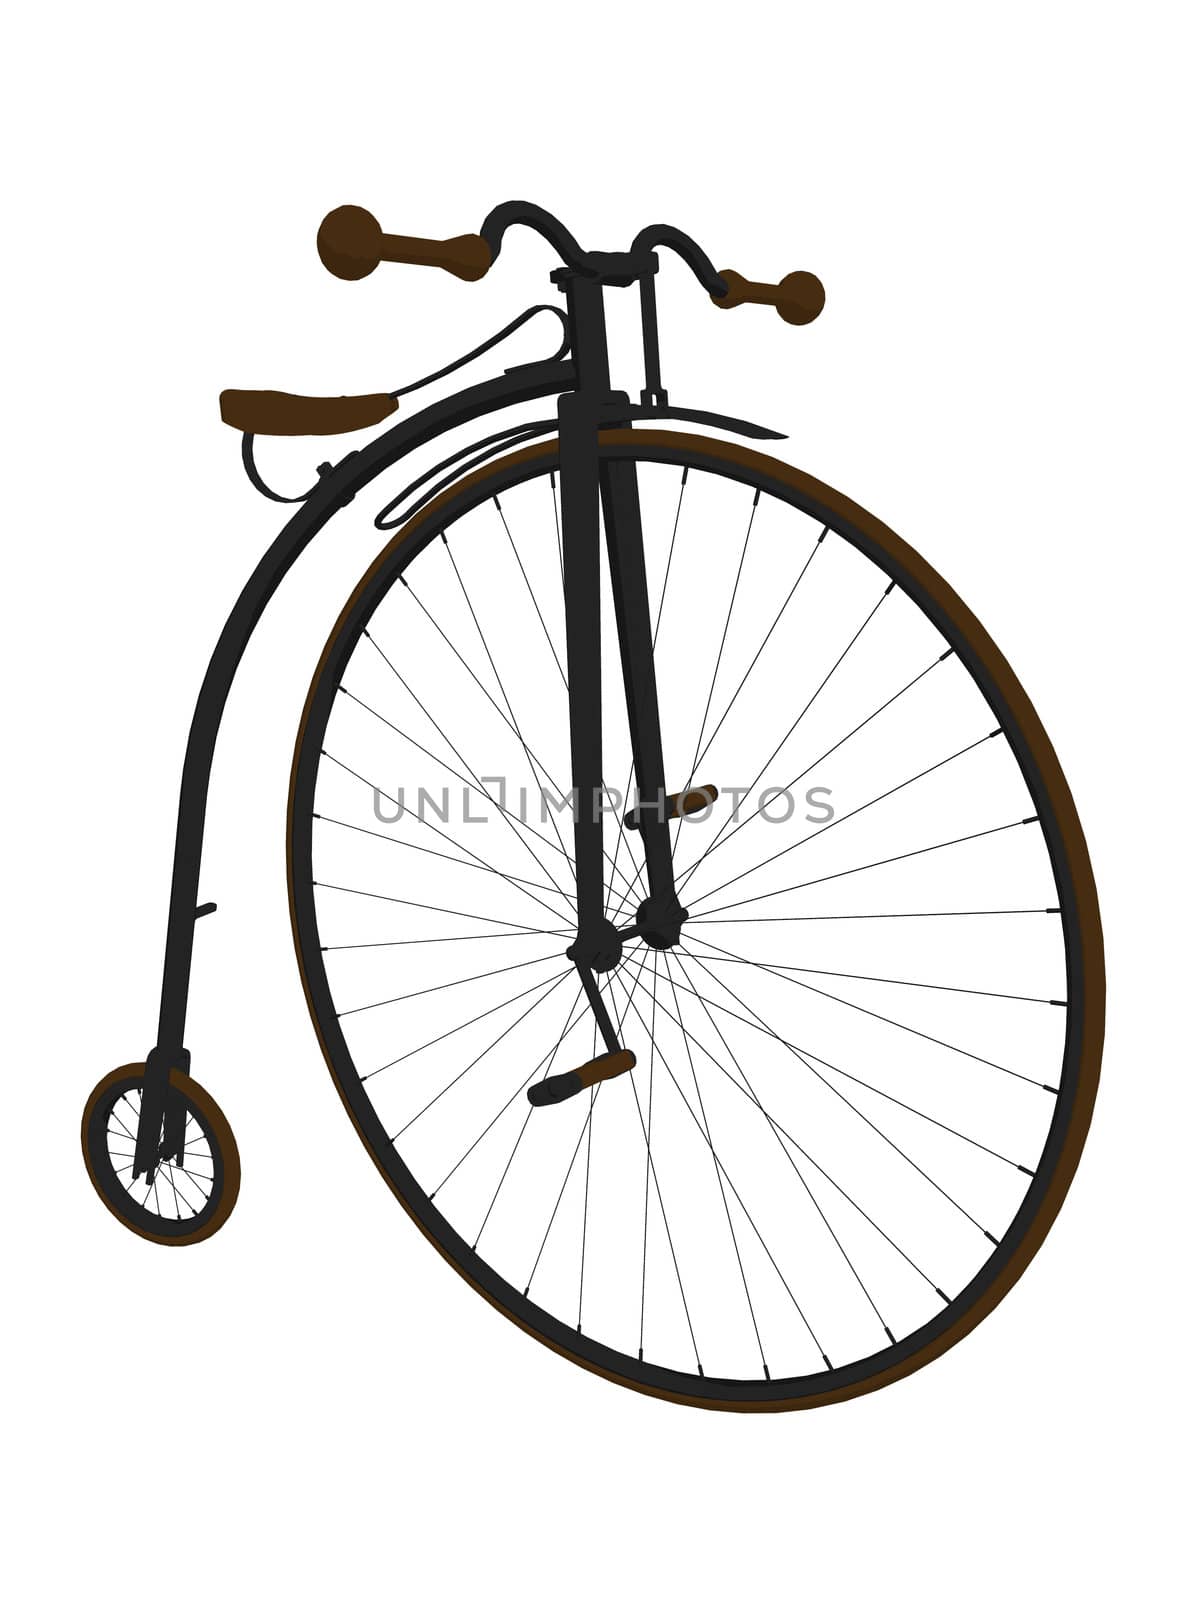 Penny Farthing Bicycle Art Illustration by kathygold